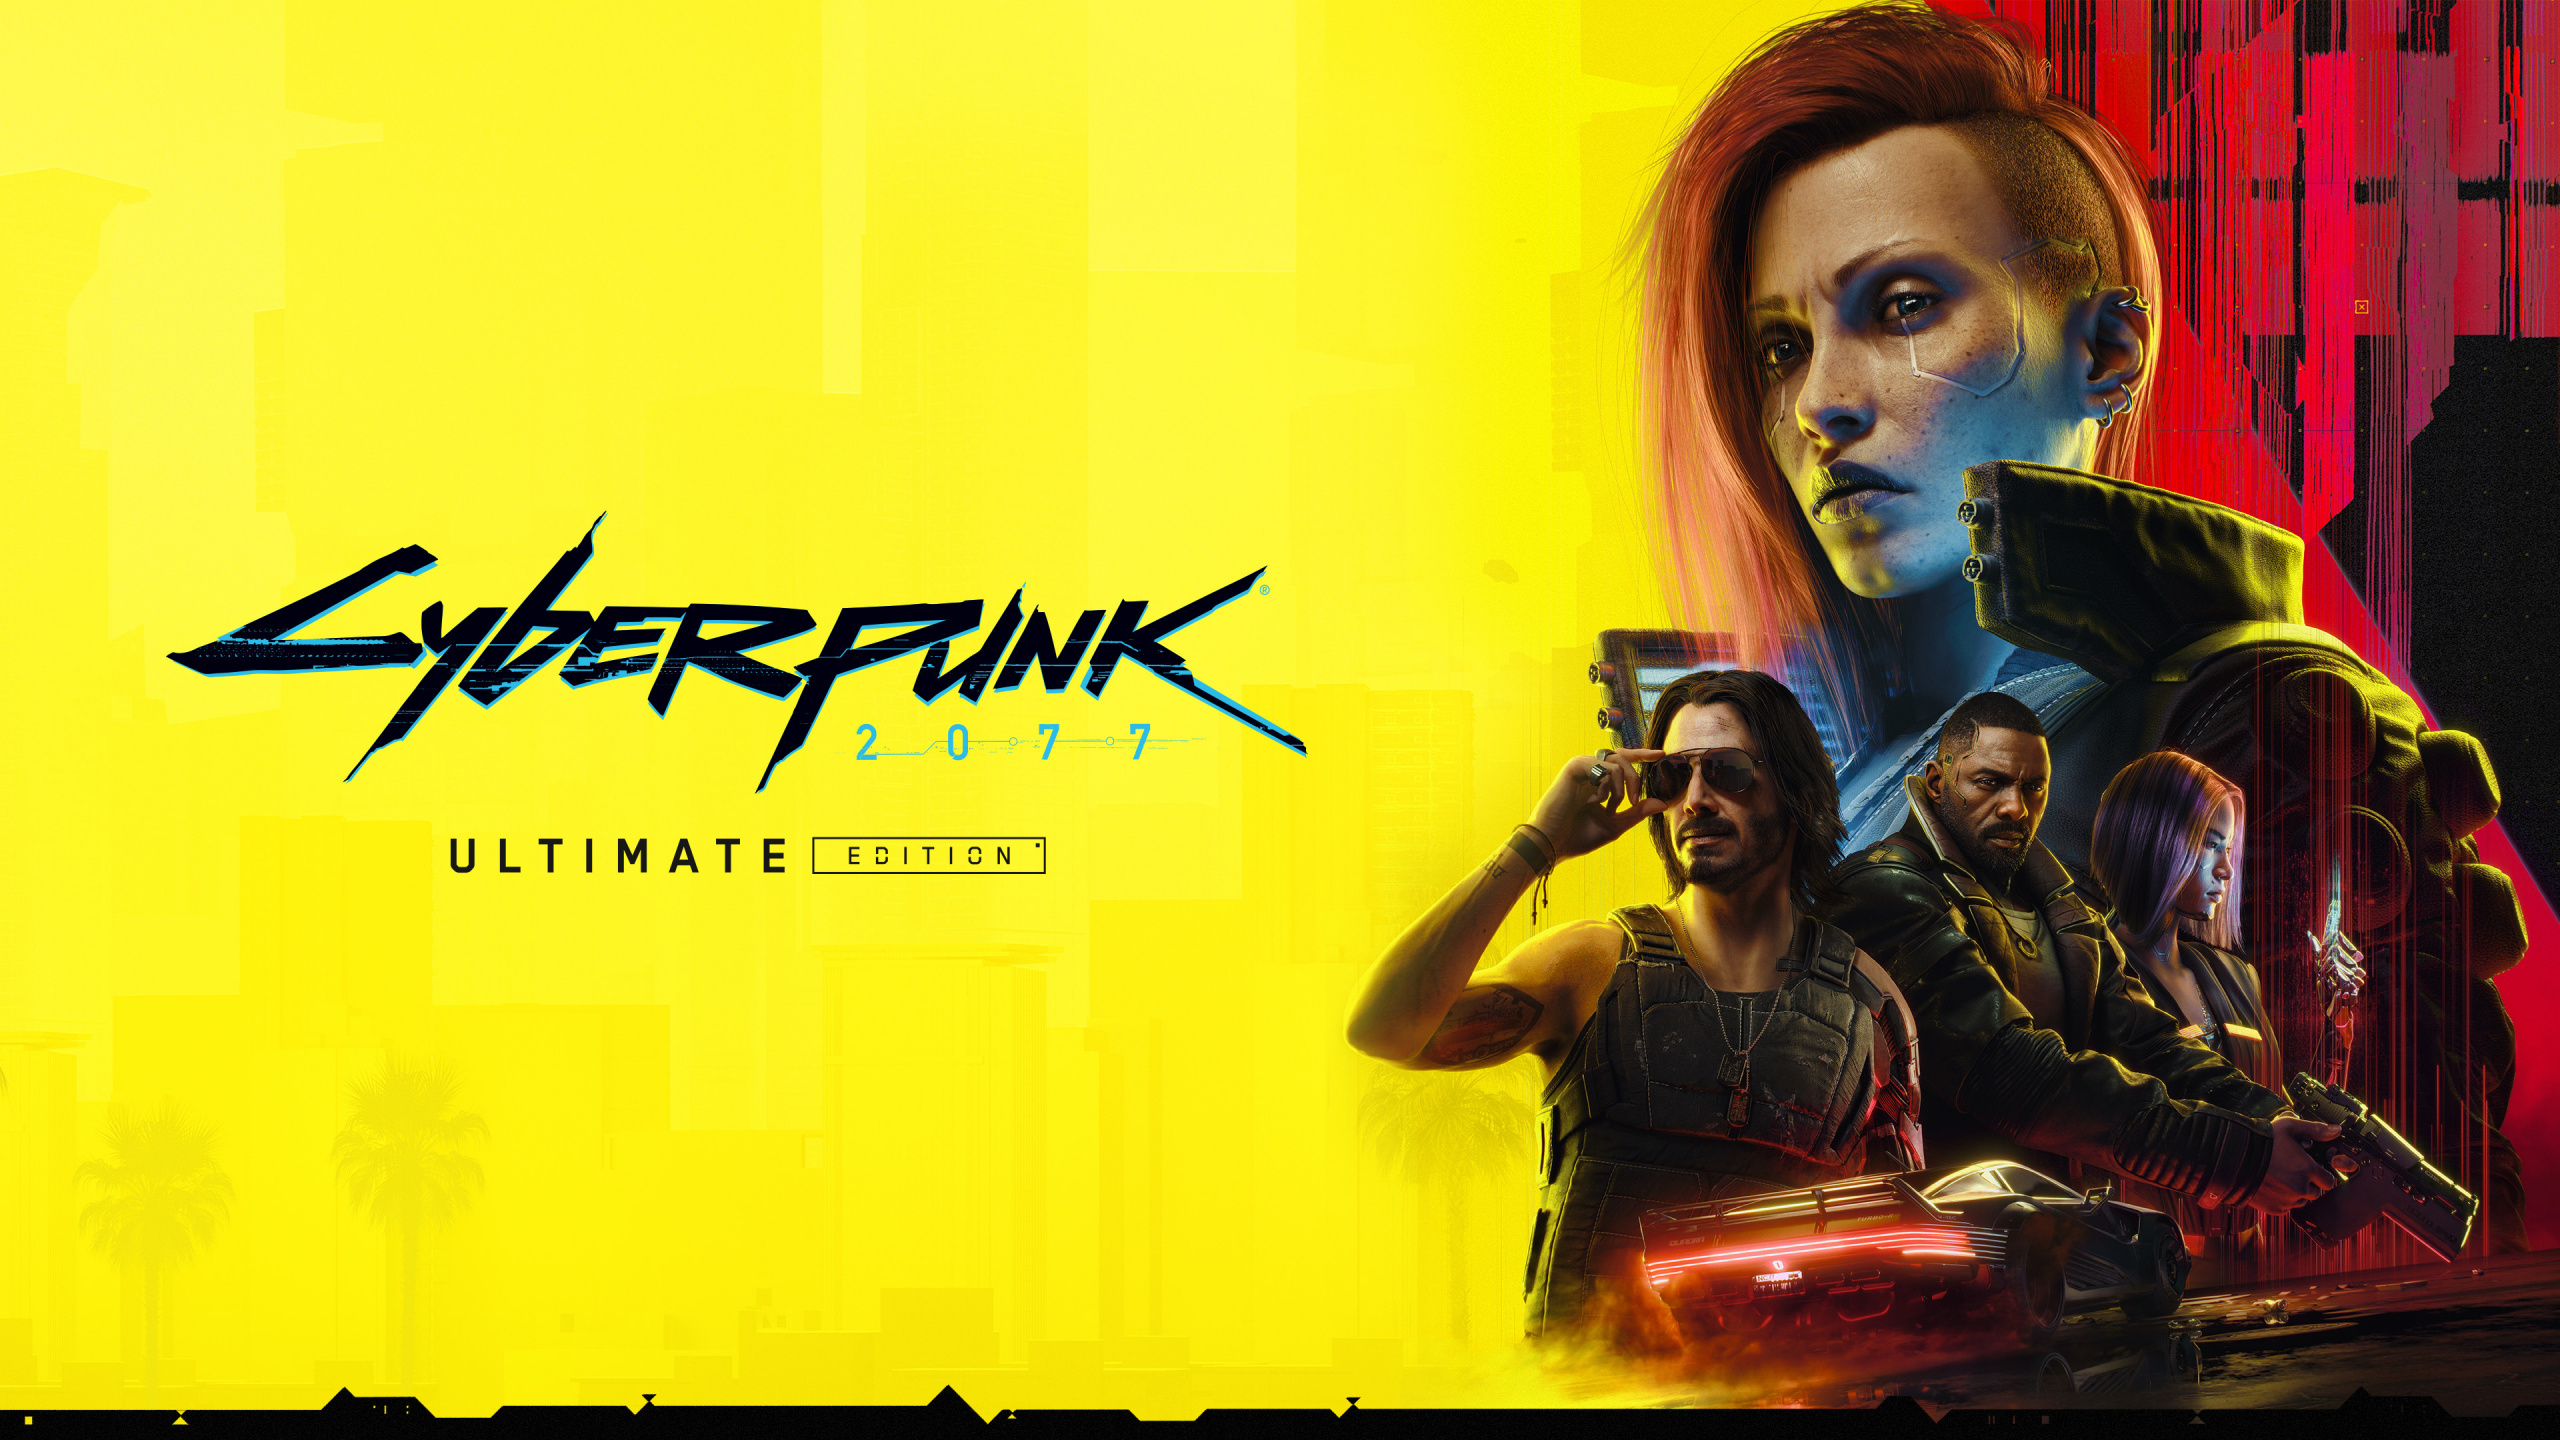 Cyberpunk 2077: Ultimate Edition and Update 2.1 Available Today! - CD  PROJEKT